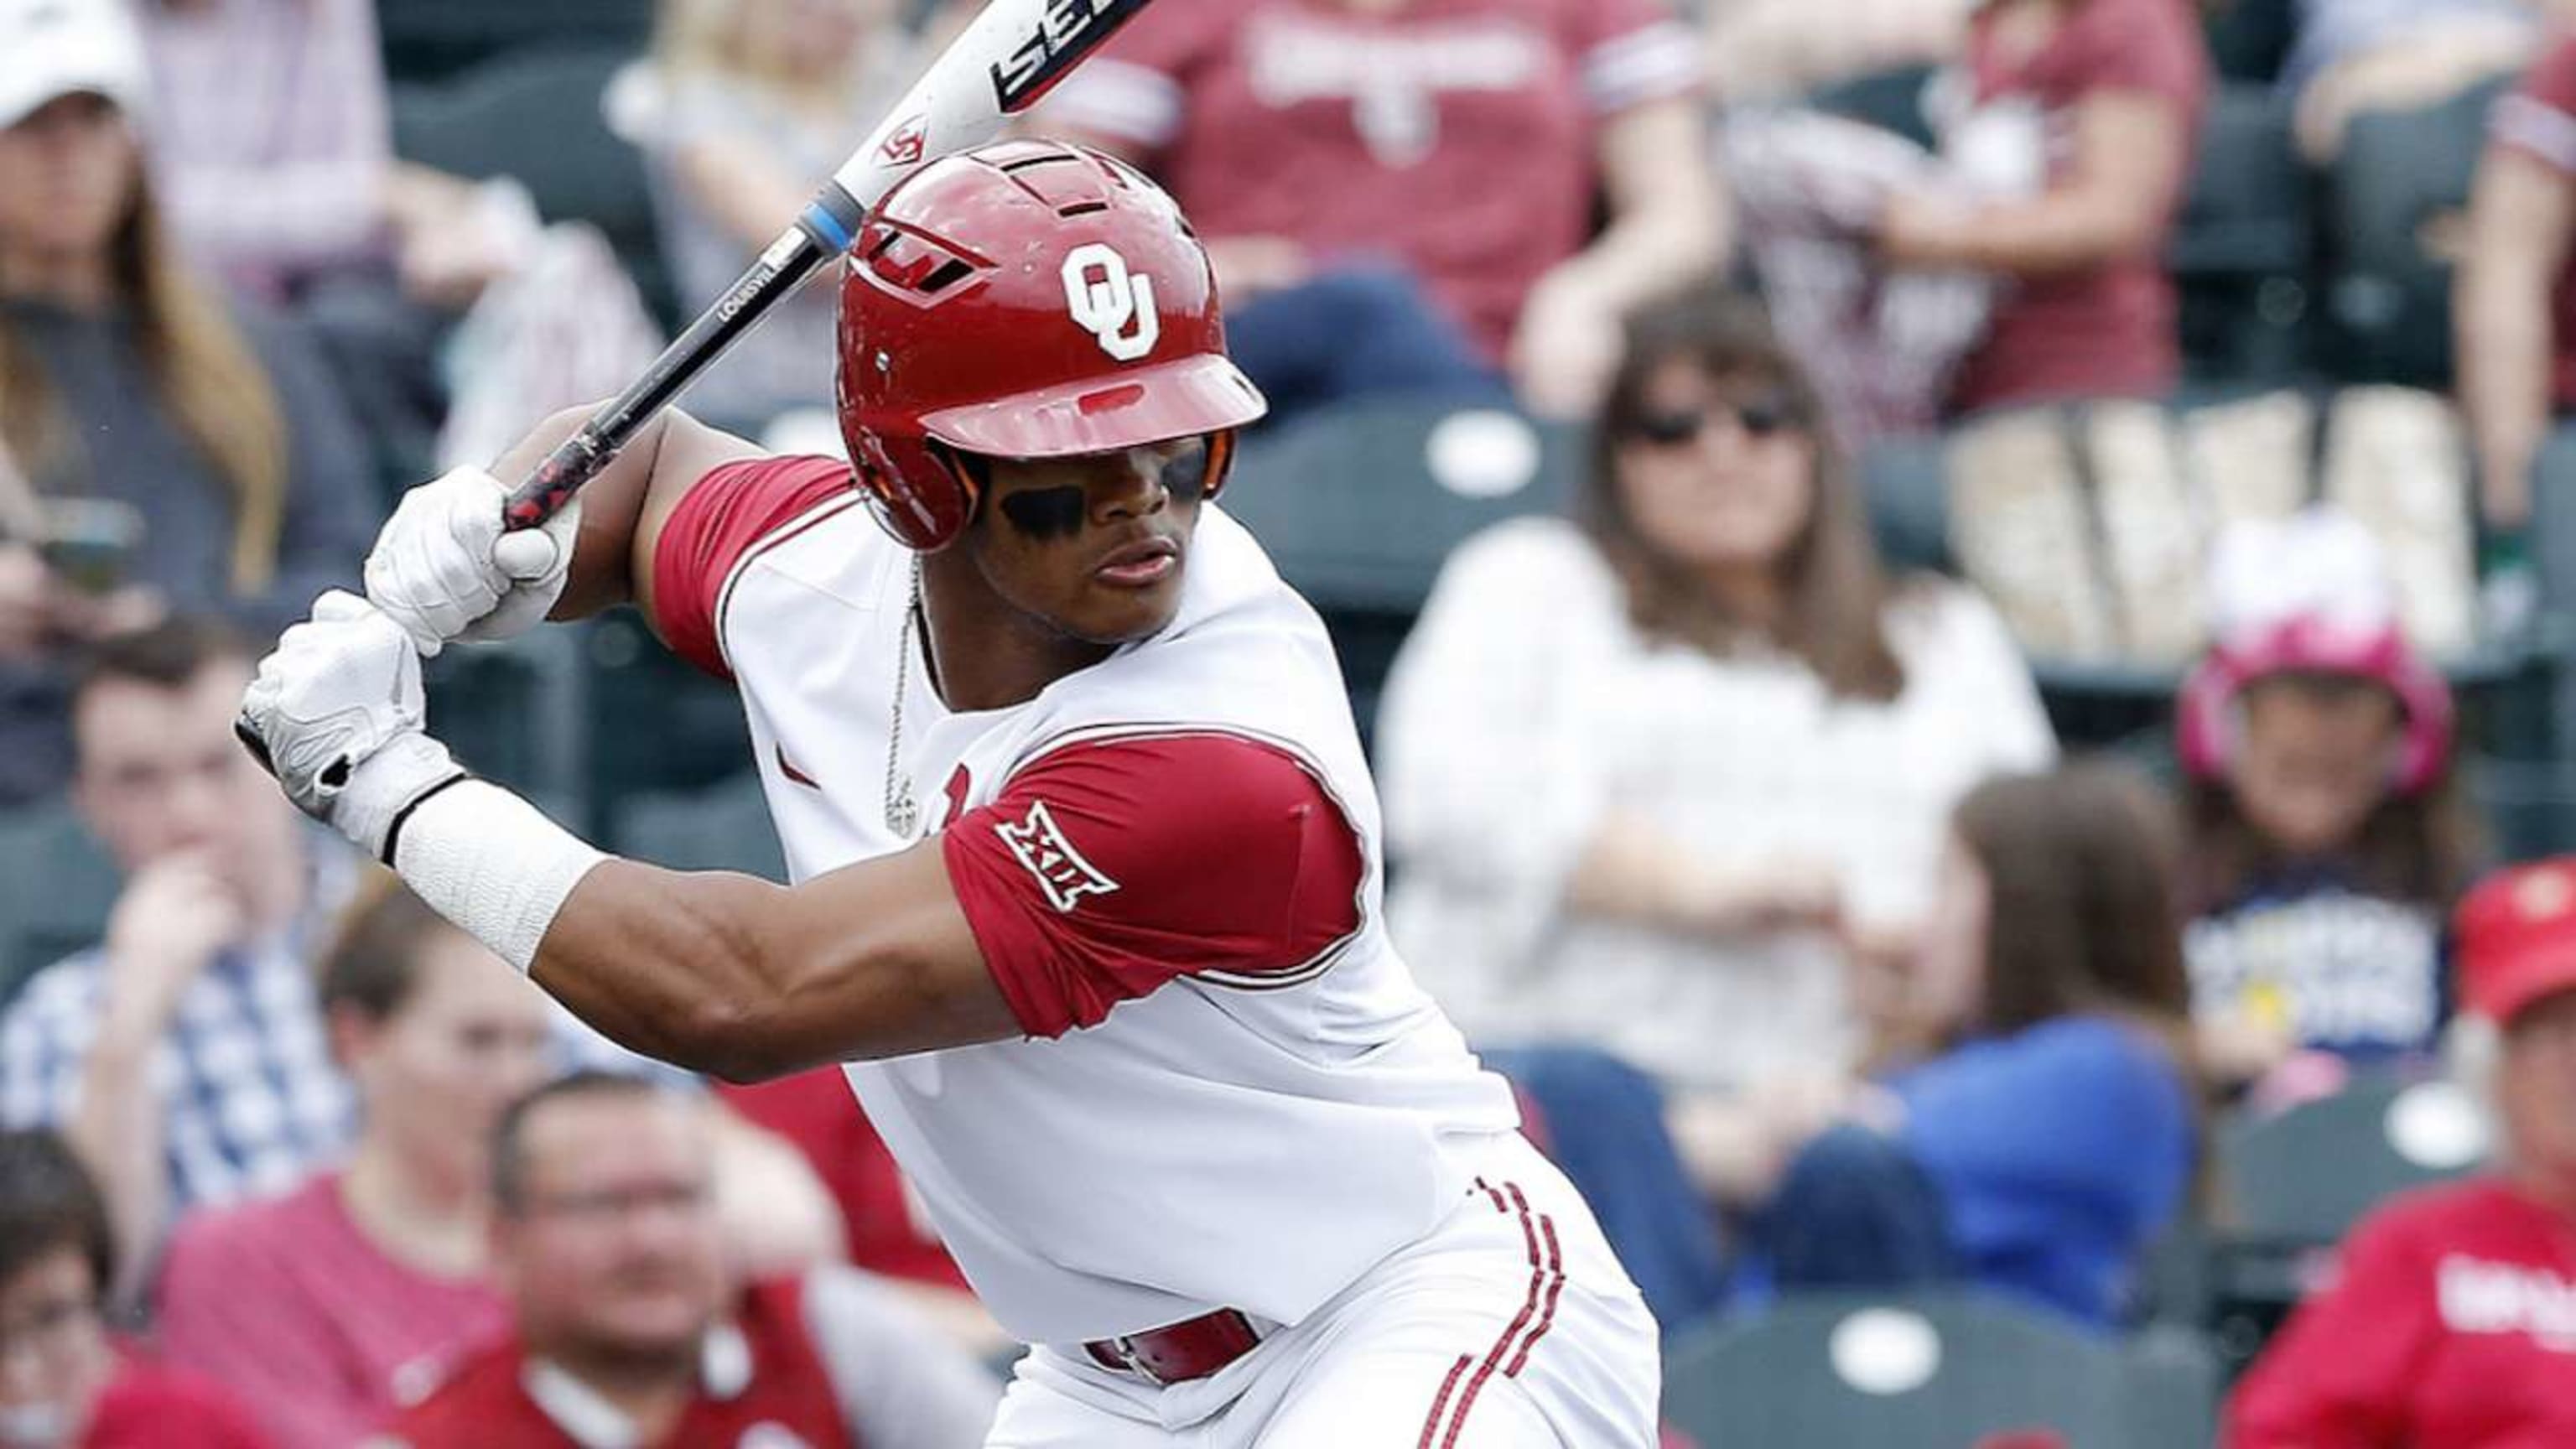 OU's Two-Sport Star Kyler Murray Picked 9th in MLB Draft